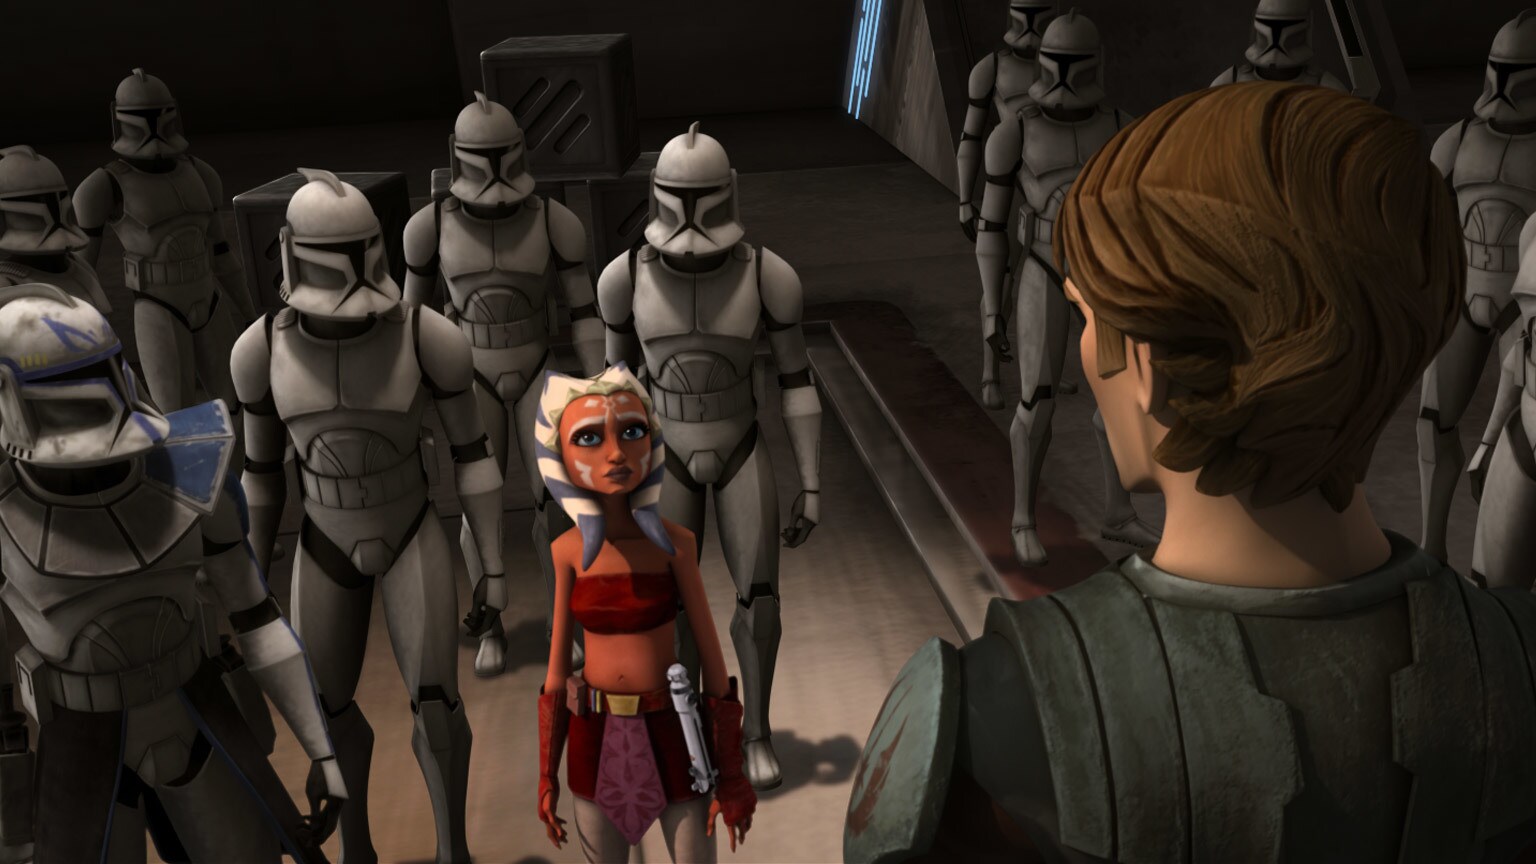 The Clone Wars Rewatch: Tragedy Strikes in the "Storm Over Ryloth"